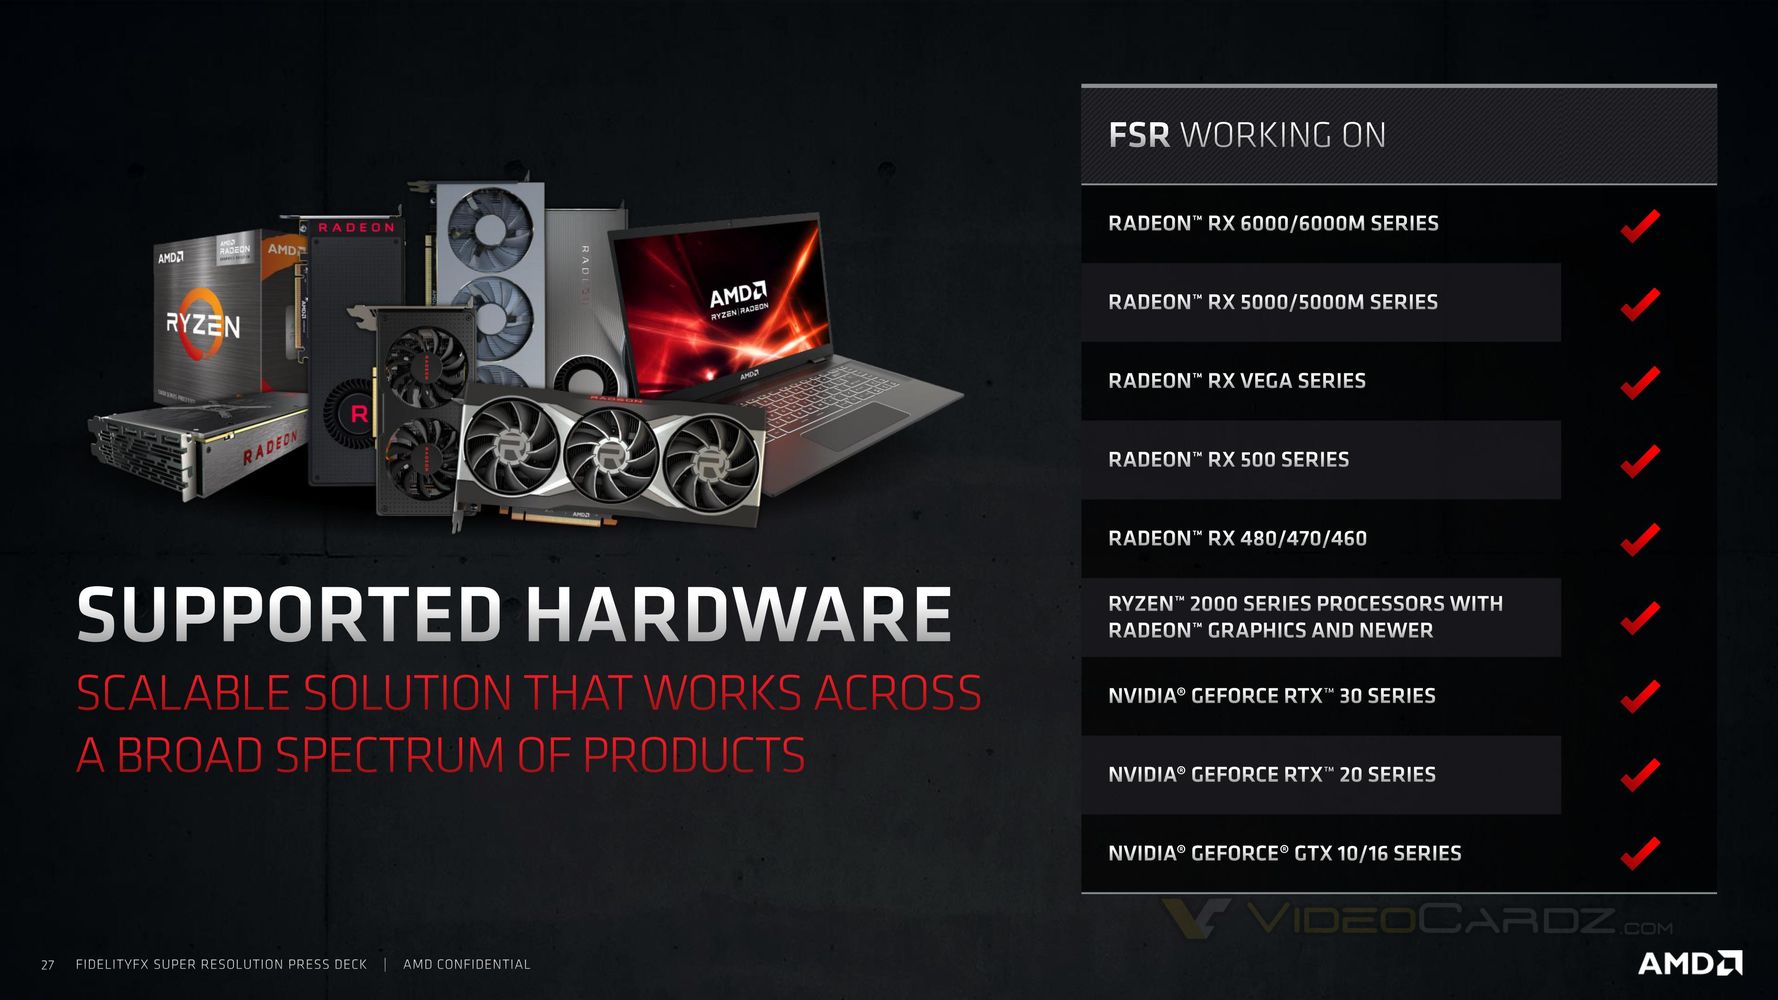 AMD FSR 3 proves there's life yet in the Nvidia GeForce GTX 1060